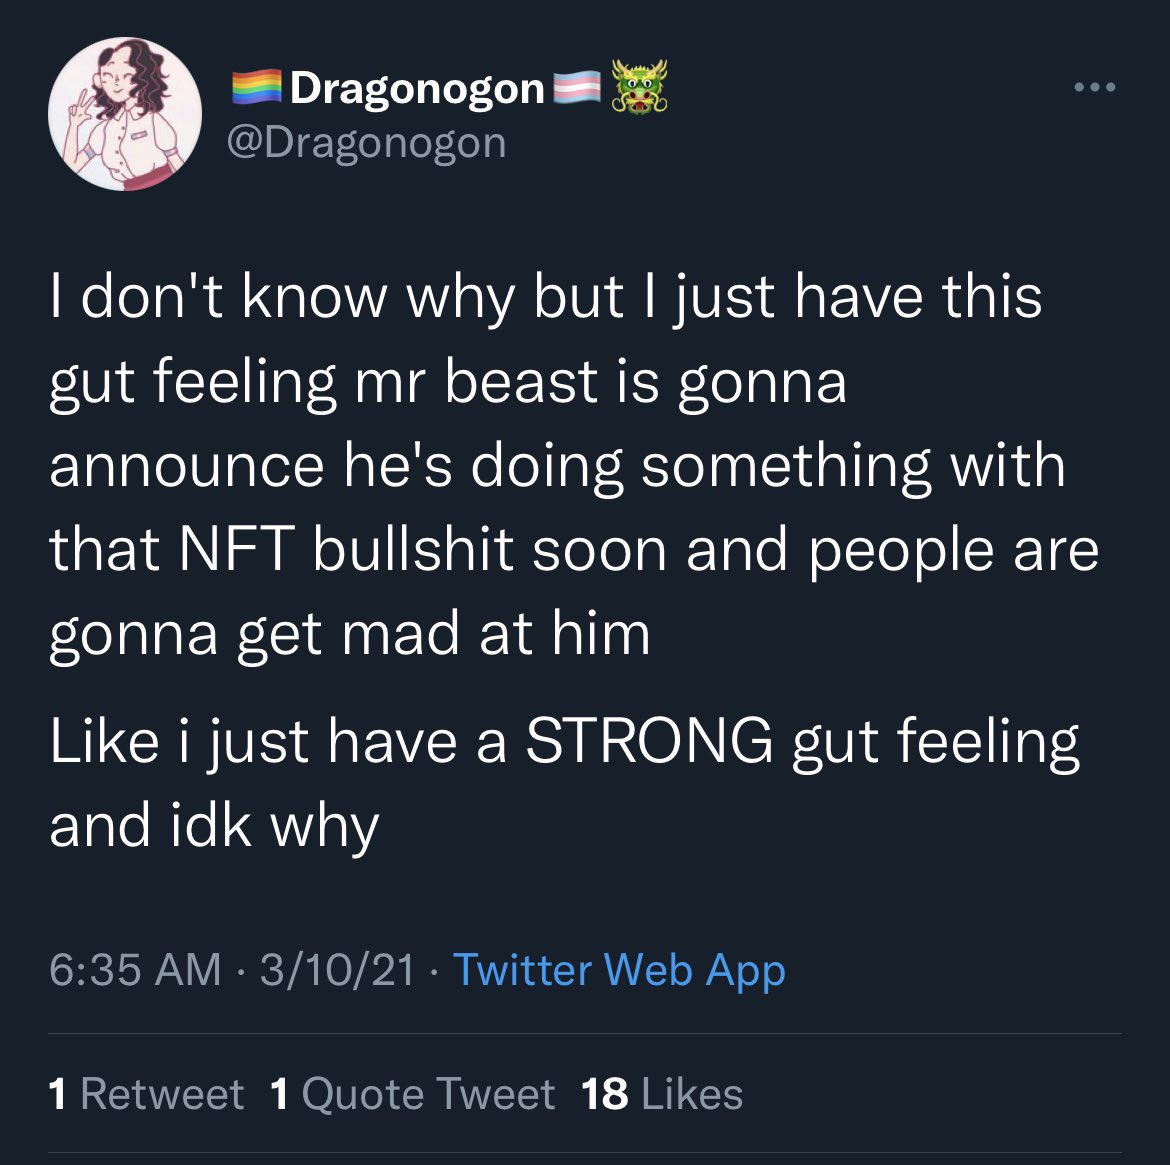 posts that aged well - atmosphere - Dragonogon Oo Sem I don't know why but I just have this gut feeling mr beast is gonna announce he's doing something with that Nft bullshit soon and people are gonna get mad at him i just have a Strong gut feeling and id